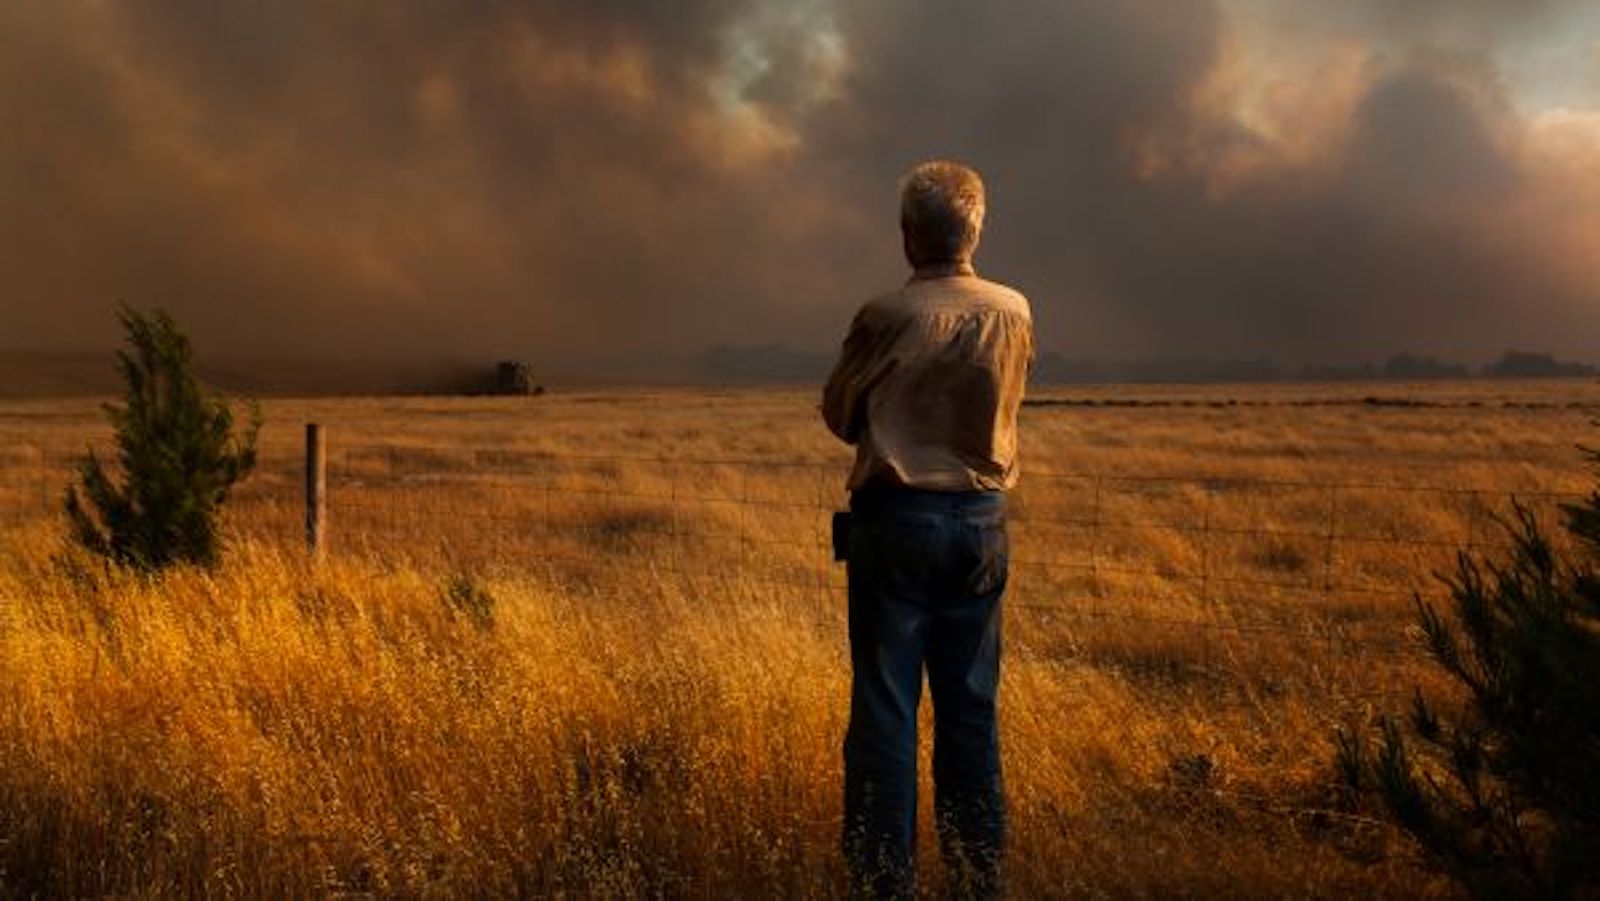 A man watches a bushfire. Wildfires and other disasters will increase, a UN report predicts.